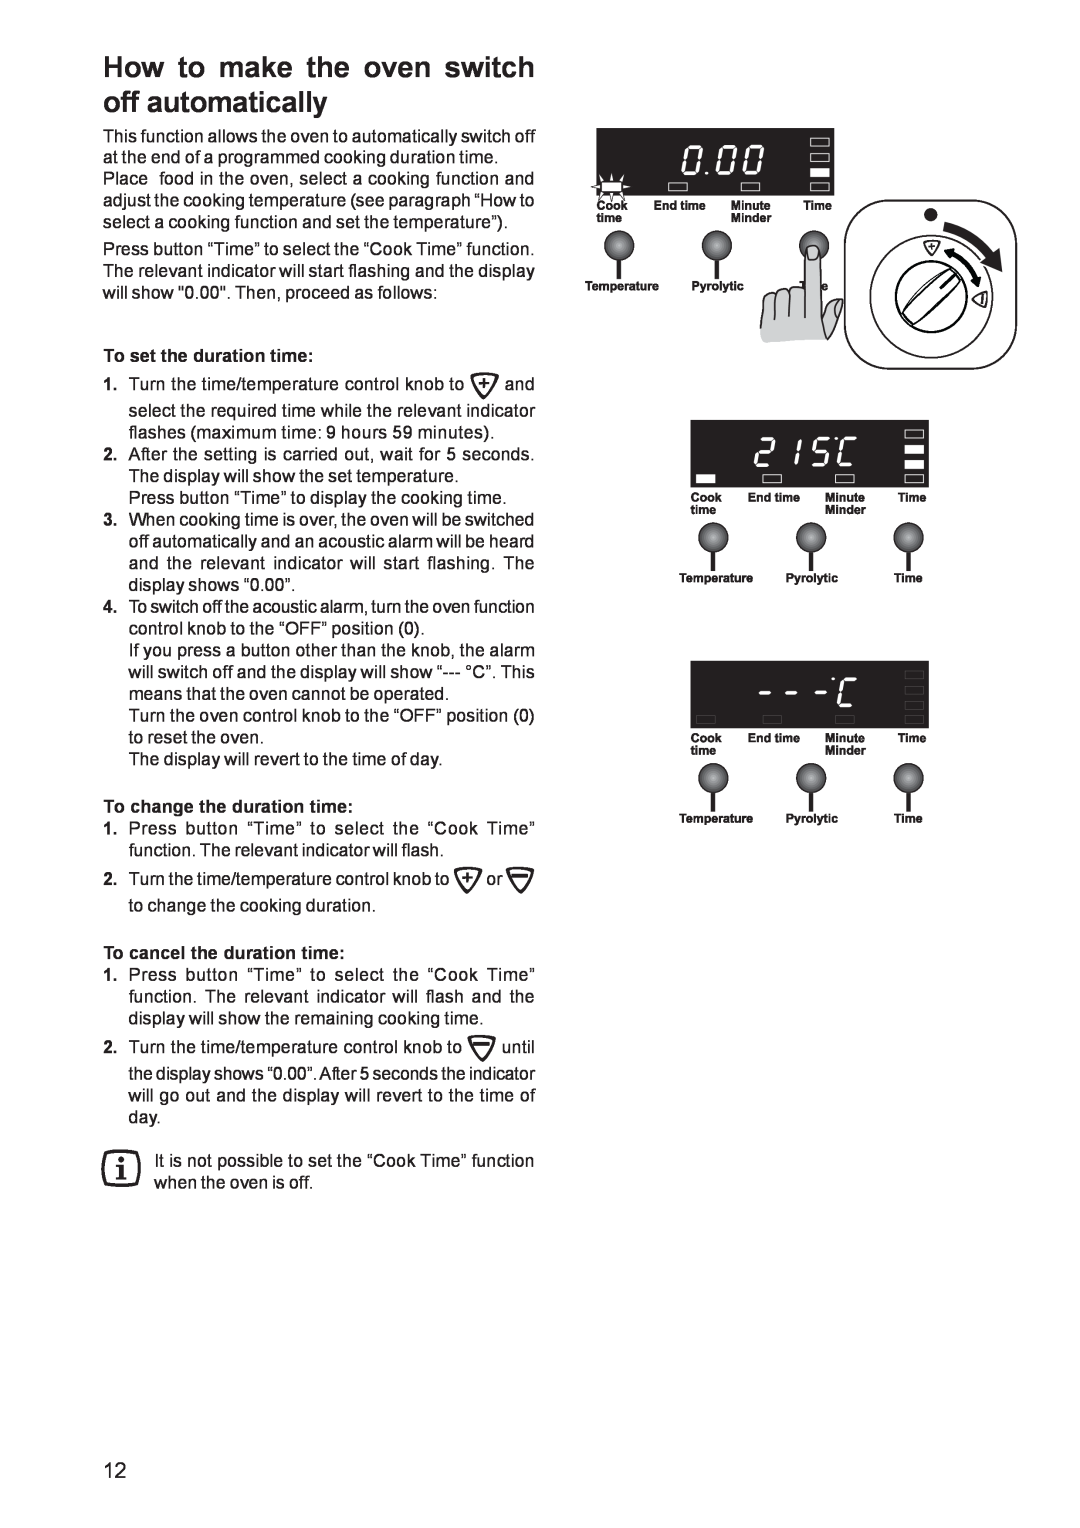 Zanussi ZCE 650 manual How to make the oven switch off automatically, To set the duration time, To change the duration time 